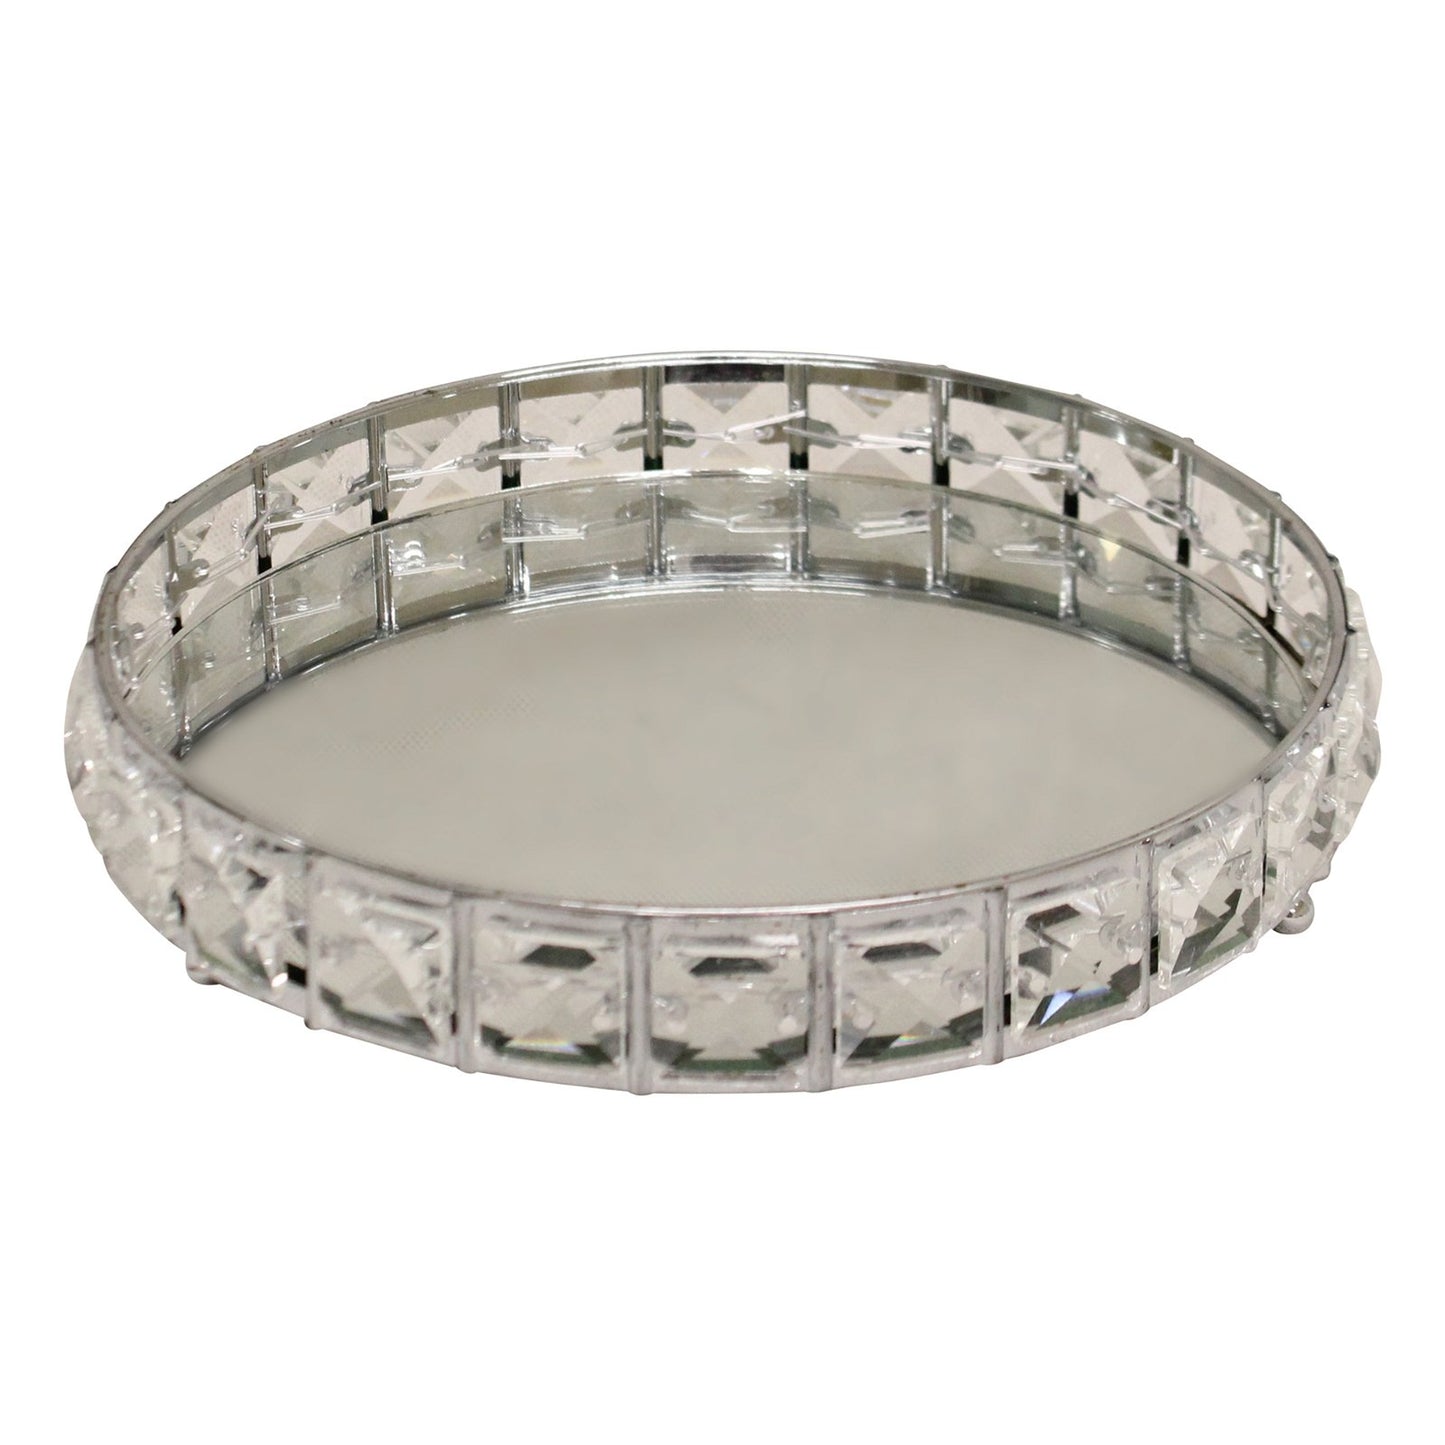 Small Mirrored Silver Tray With Bead Design, 21cm.